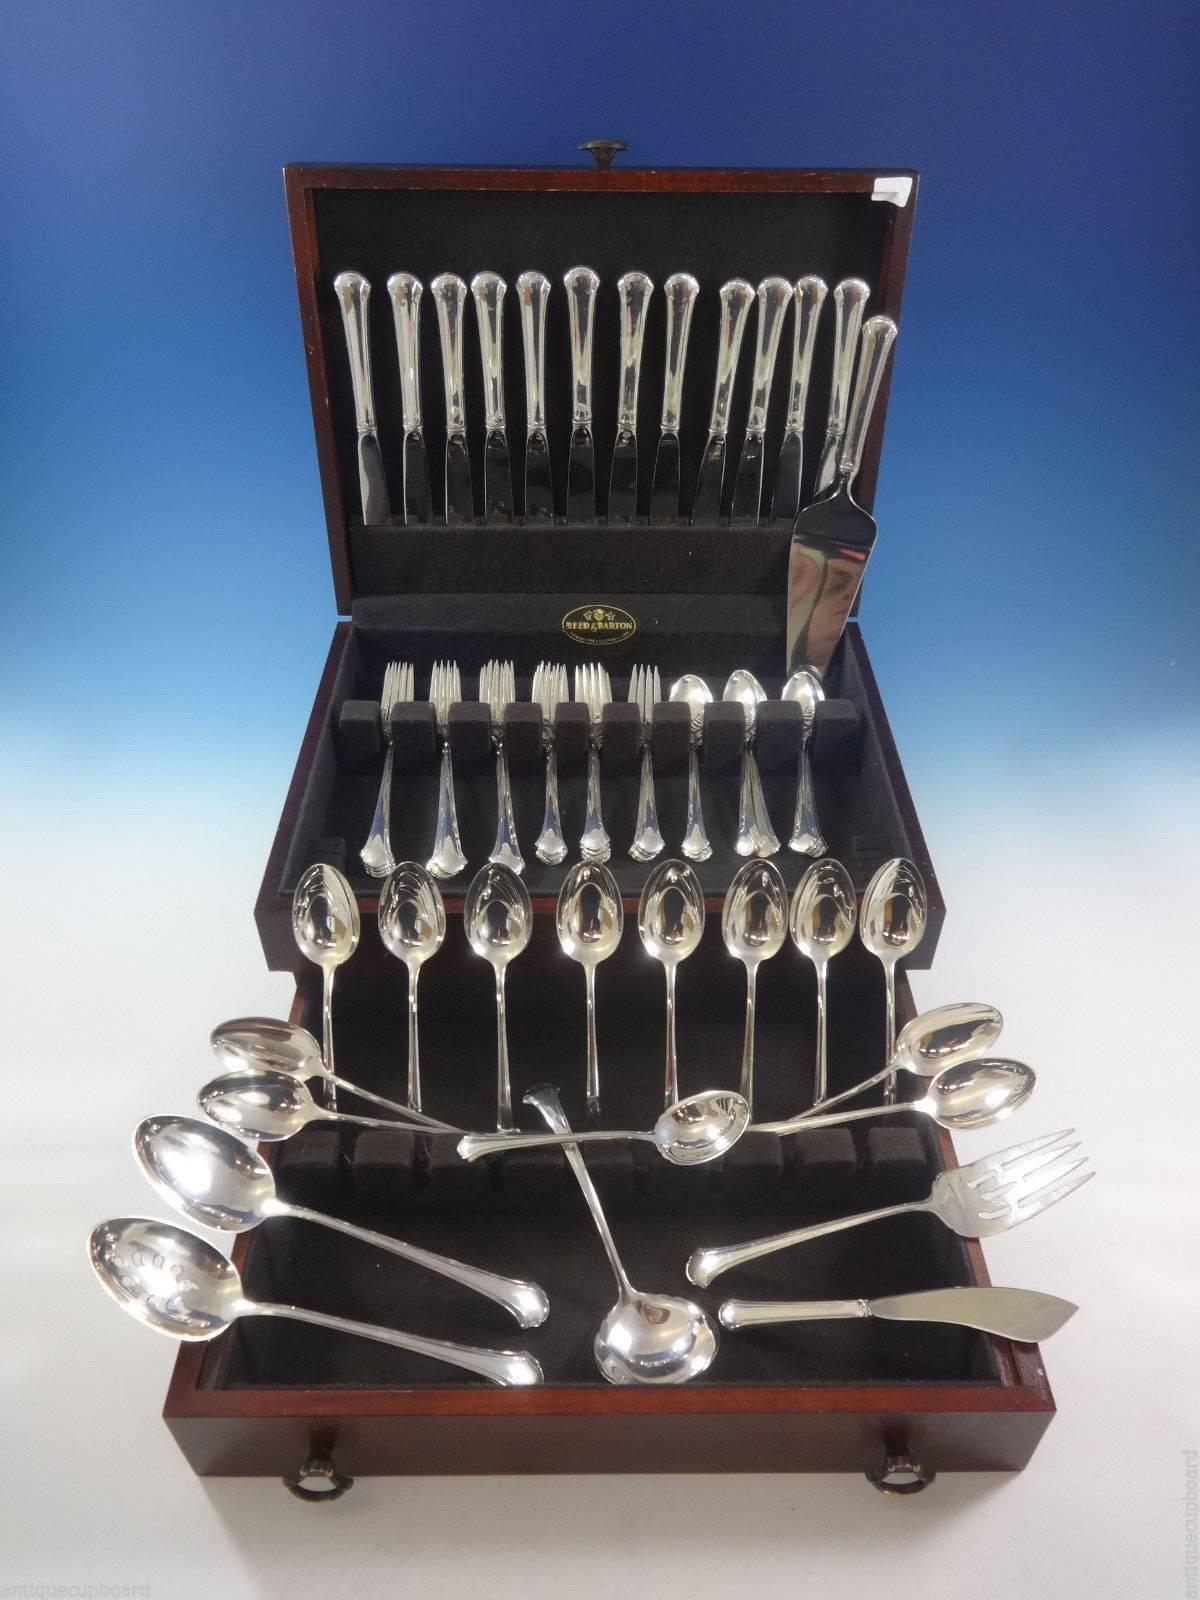 Chippendale by Towle sterling silver flatware set - 67 pieces. This set includes: 

12 knives, 8 7/8